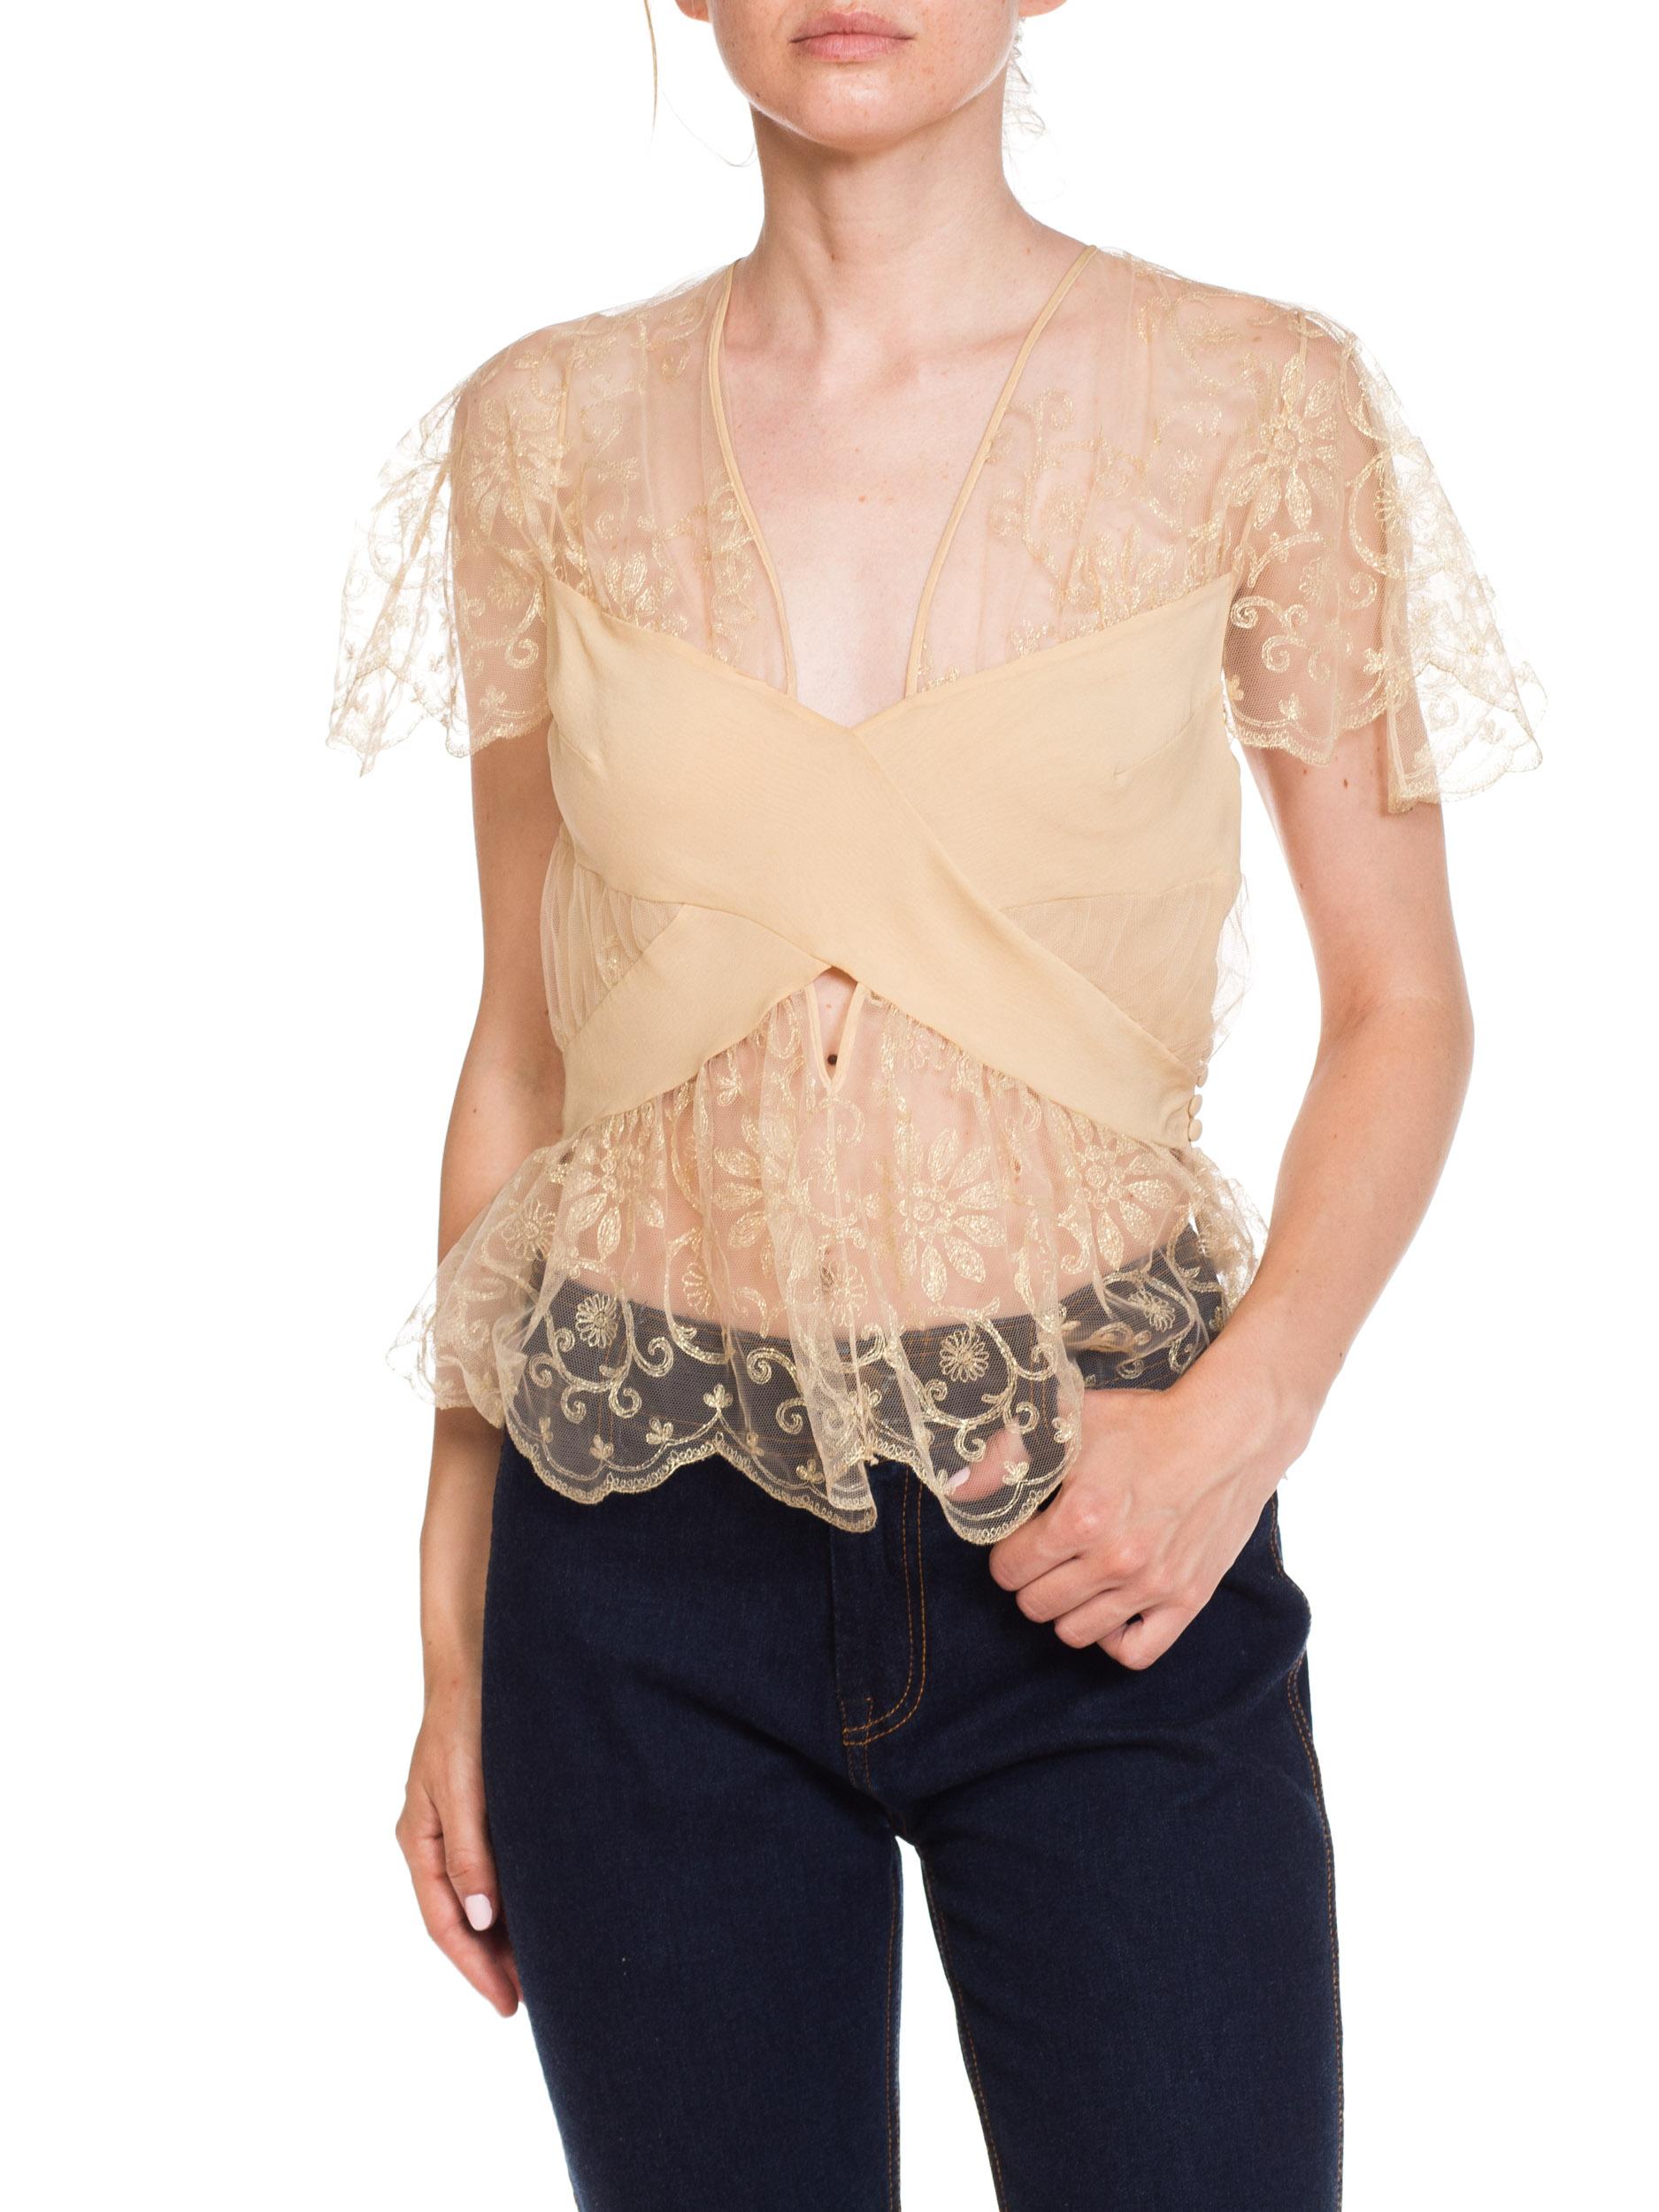 John Galliano for Christian Dior Sheer Lace Blouse 2